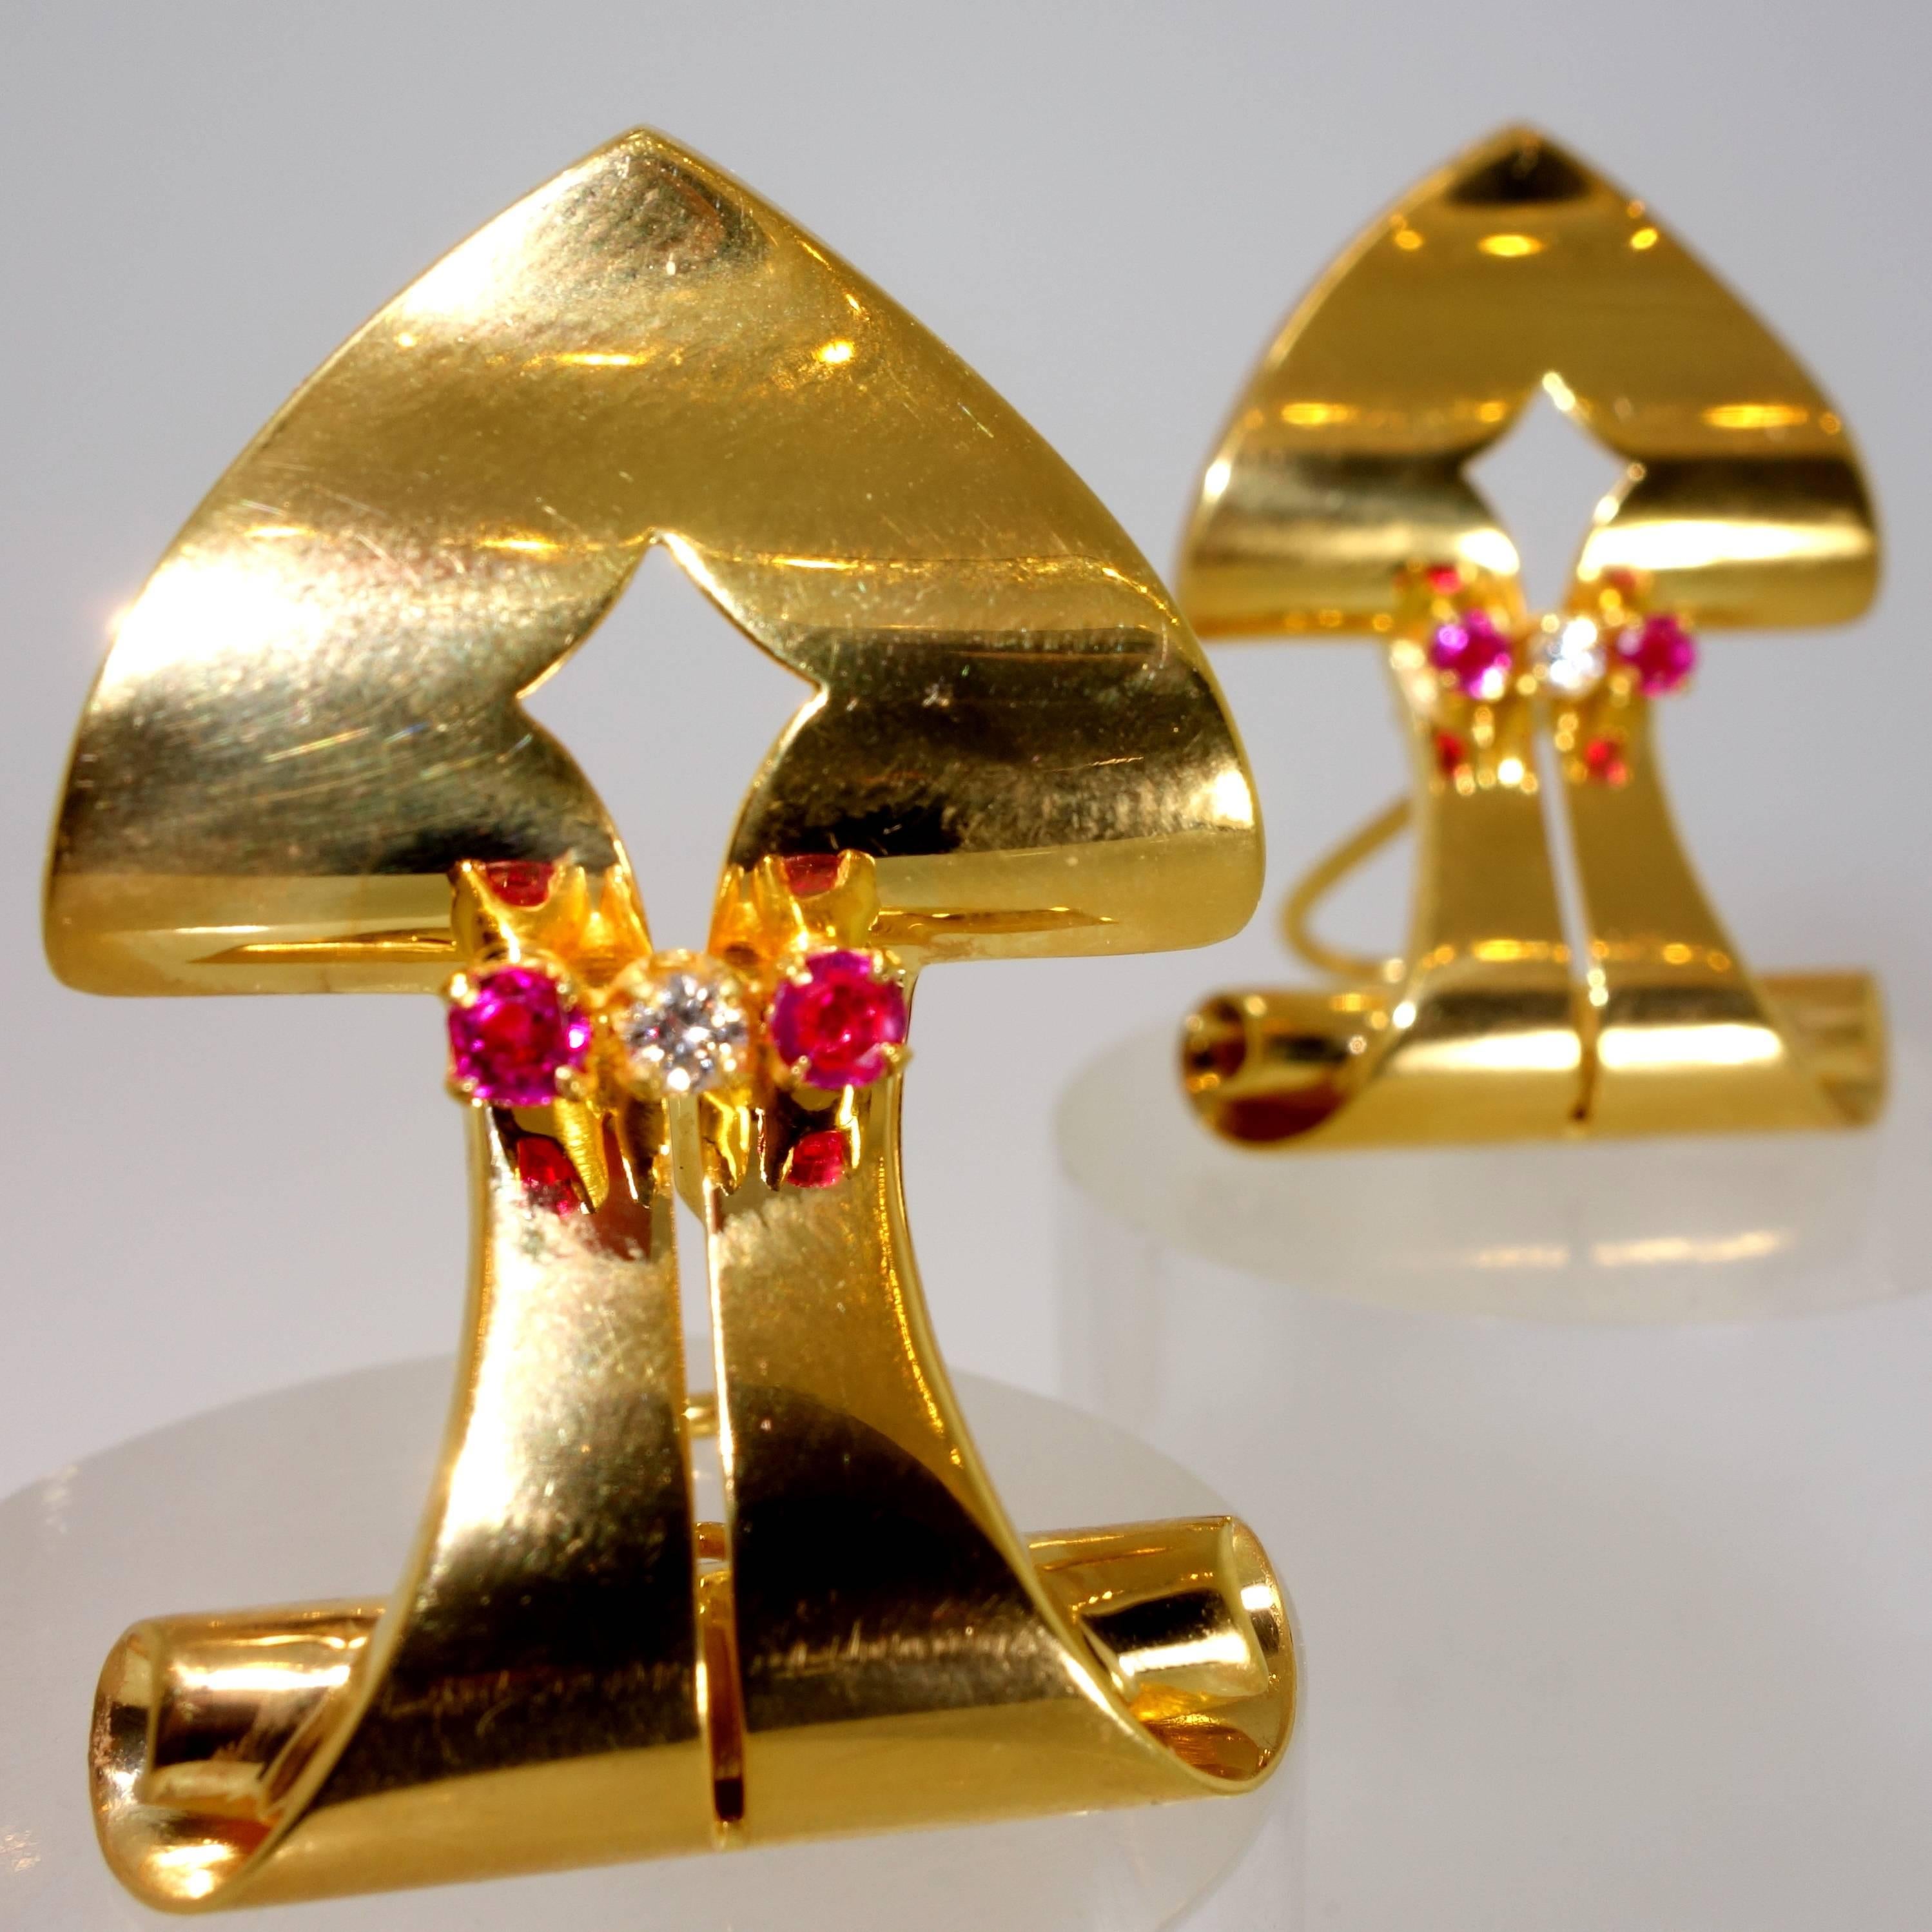 18K yellow gold in a shield shape with four natural rubies and two white diamonds  A classic retro or Art Moderne motif, one seen in brooches, clips and earrings, these can be worn either pierced or non pierced.  The two European cut diamonds total